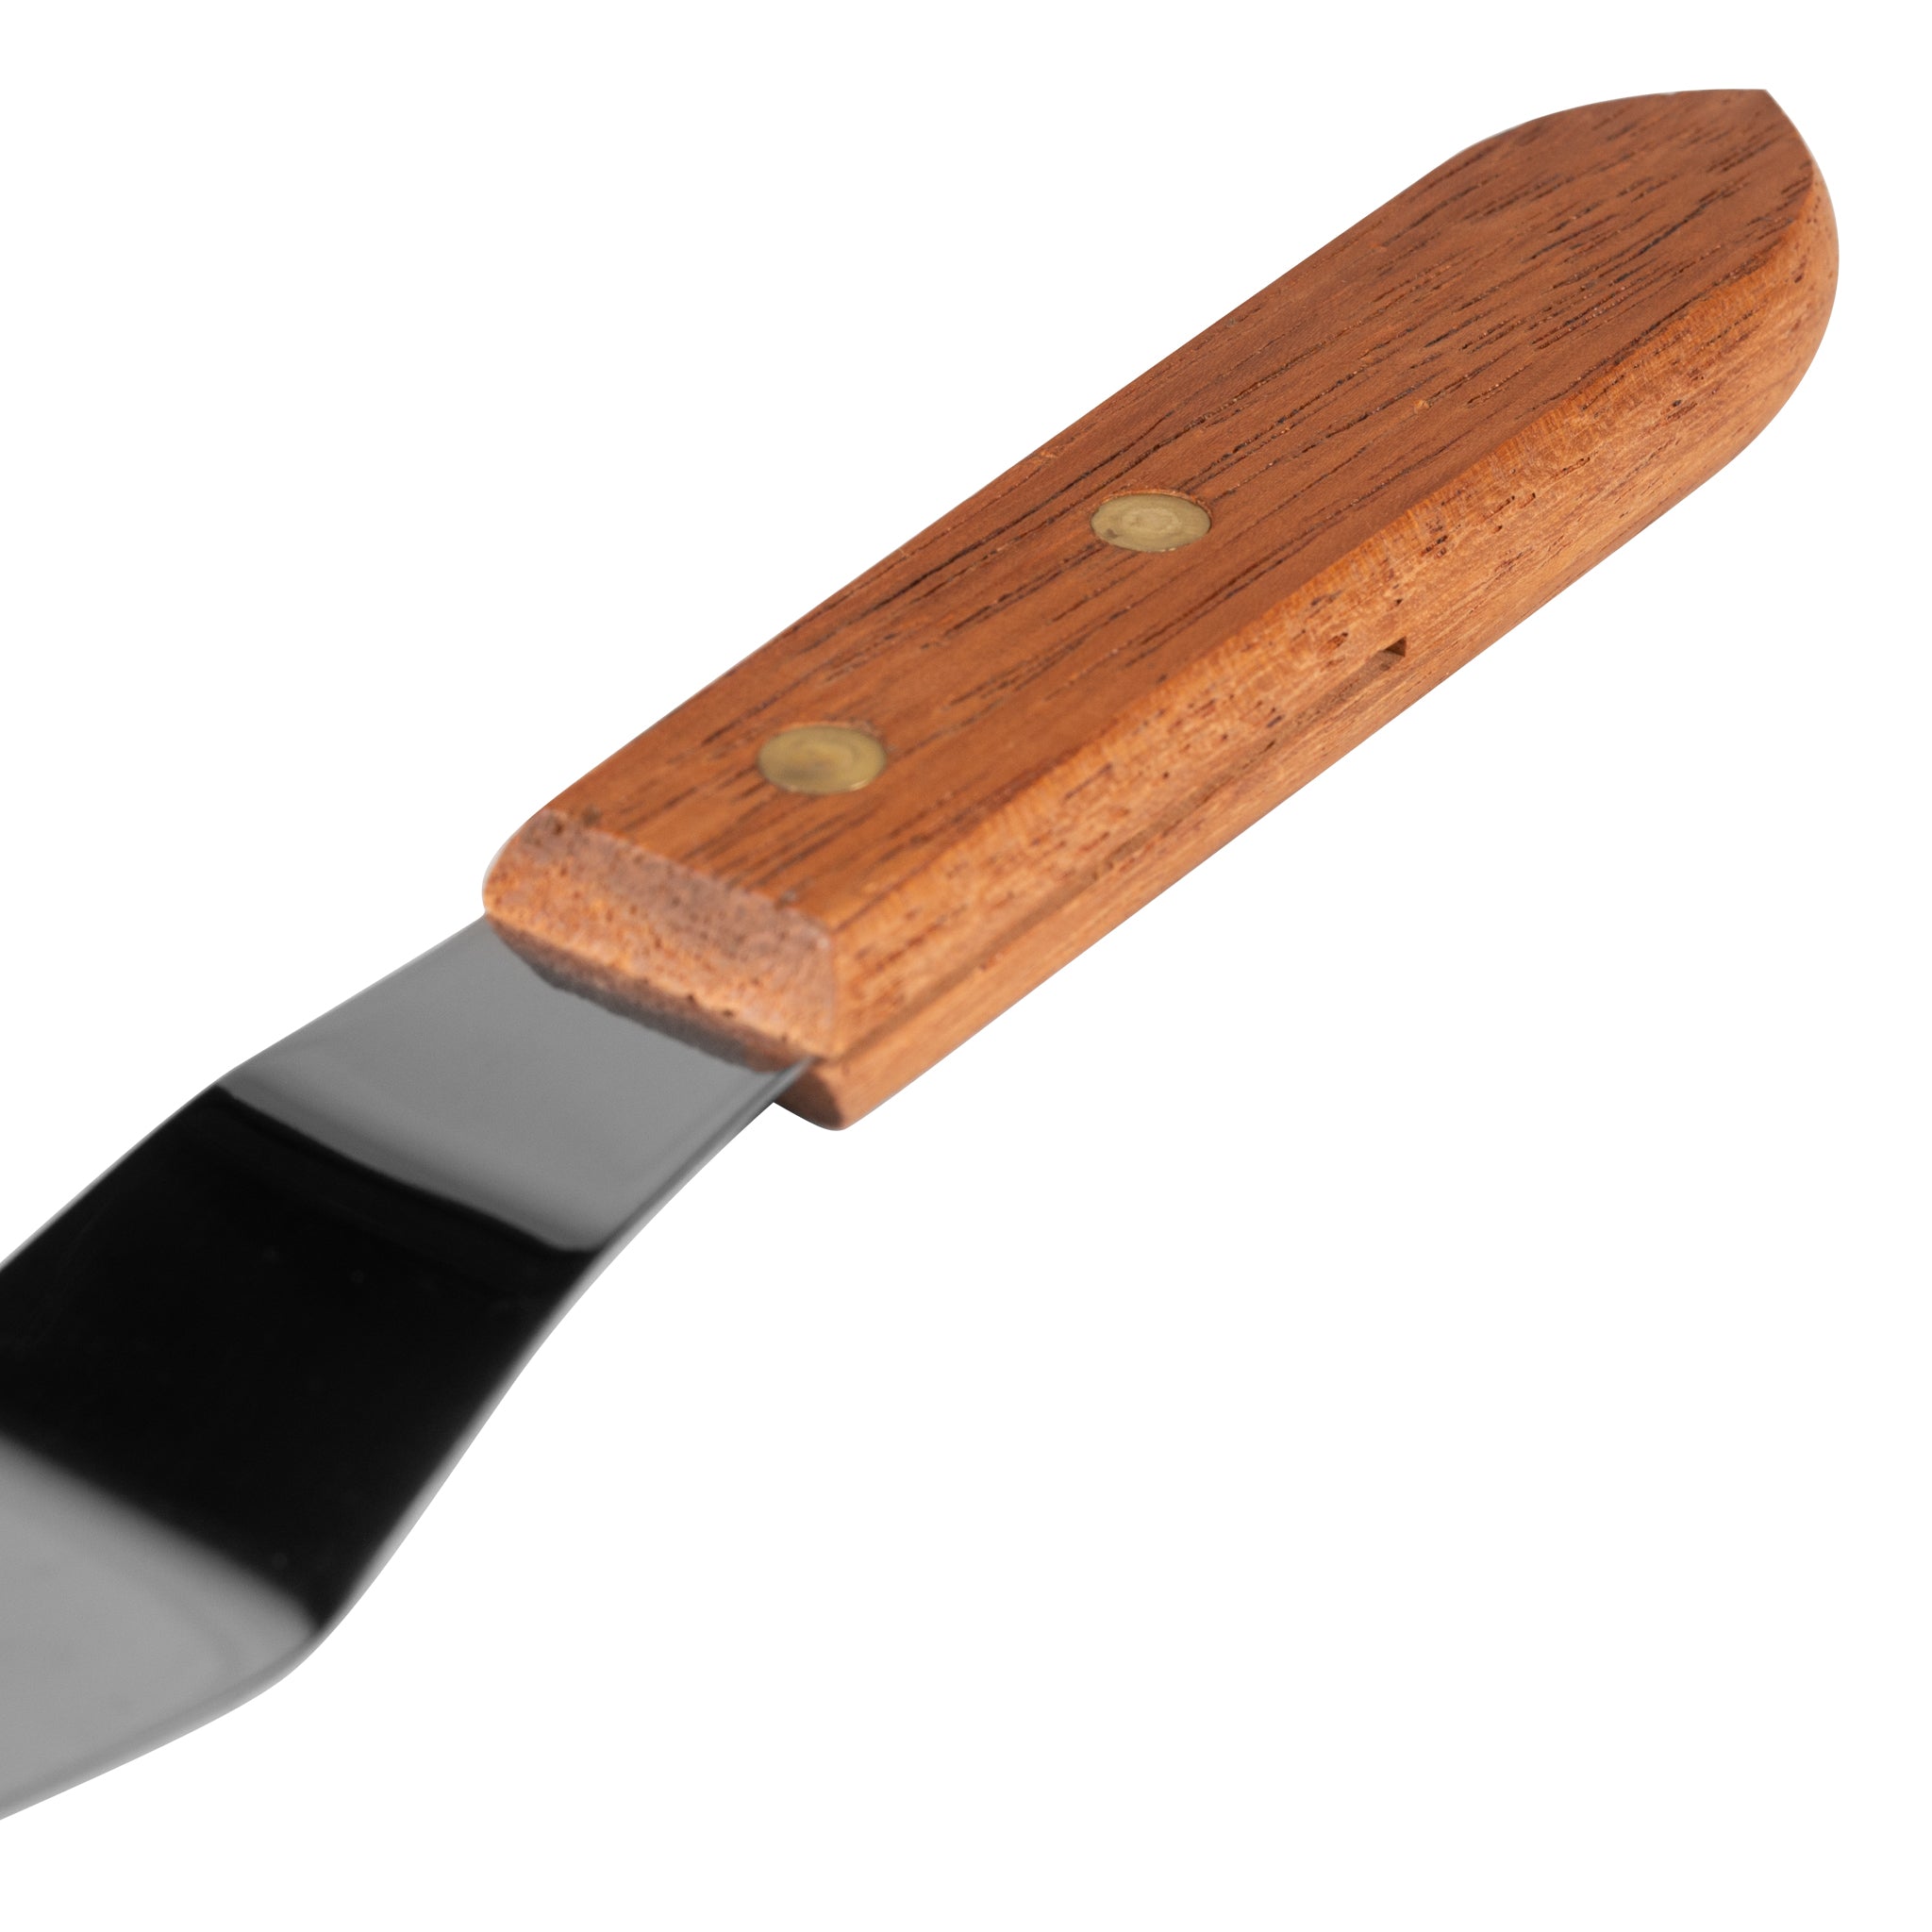 Ateco 1383 5 Blade Tapered Offset Baking / Icing Spatula with Wood Handle